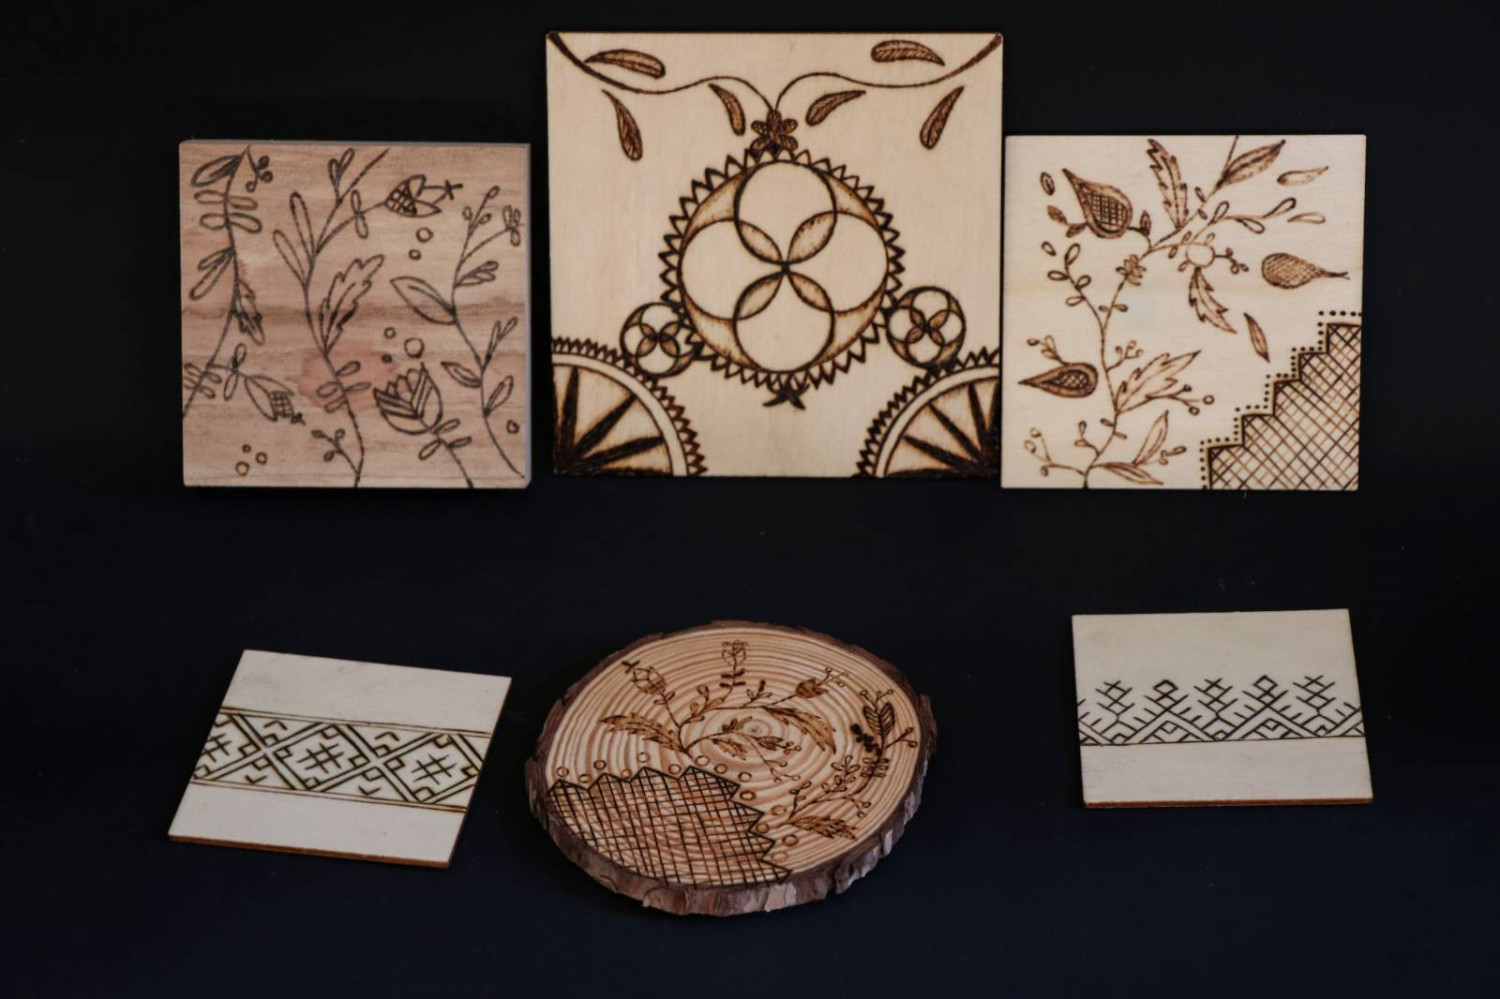 Pyrography pieces exploring traditional embroidery patterns